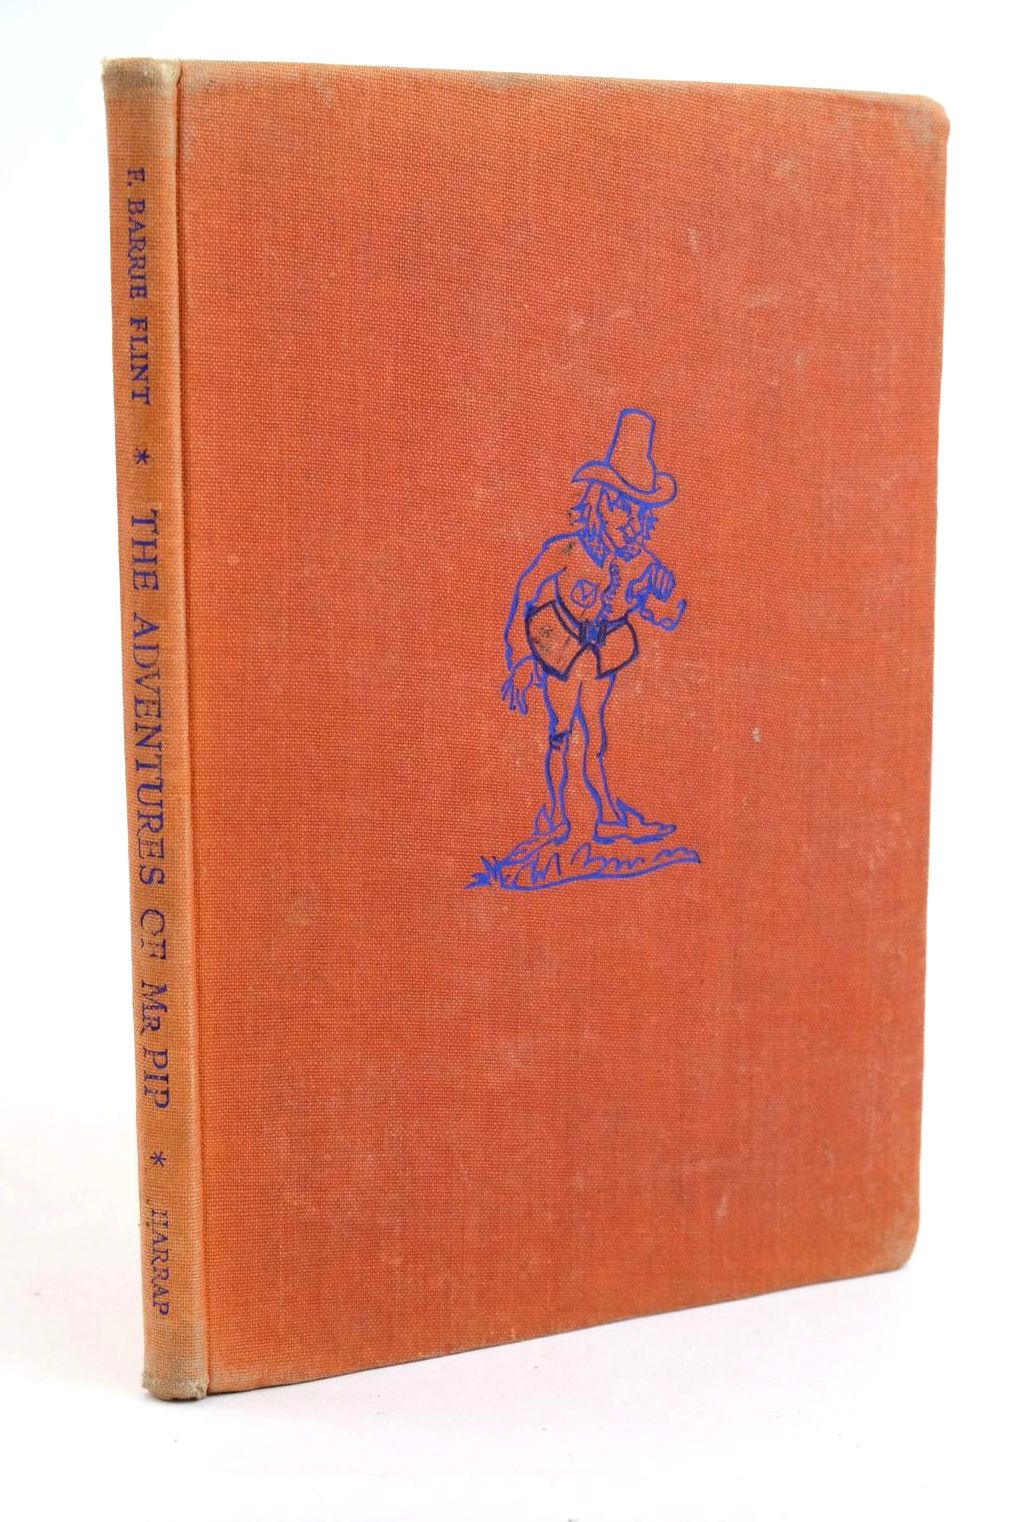 Photo of THE ADVENTURES OF MR. PIP written by Flint, F. Barrie illustrated by Ellis, Yolande published by George G. Harrap &amp; Co. Ltd. (STOCK CODE: 1321567)  for sale by Stella & Rose's Books